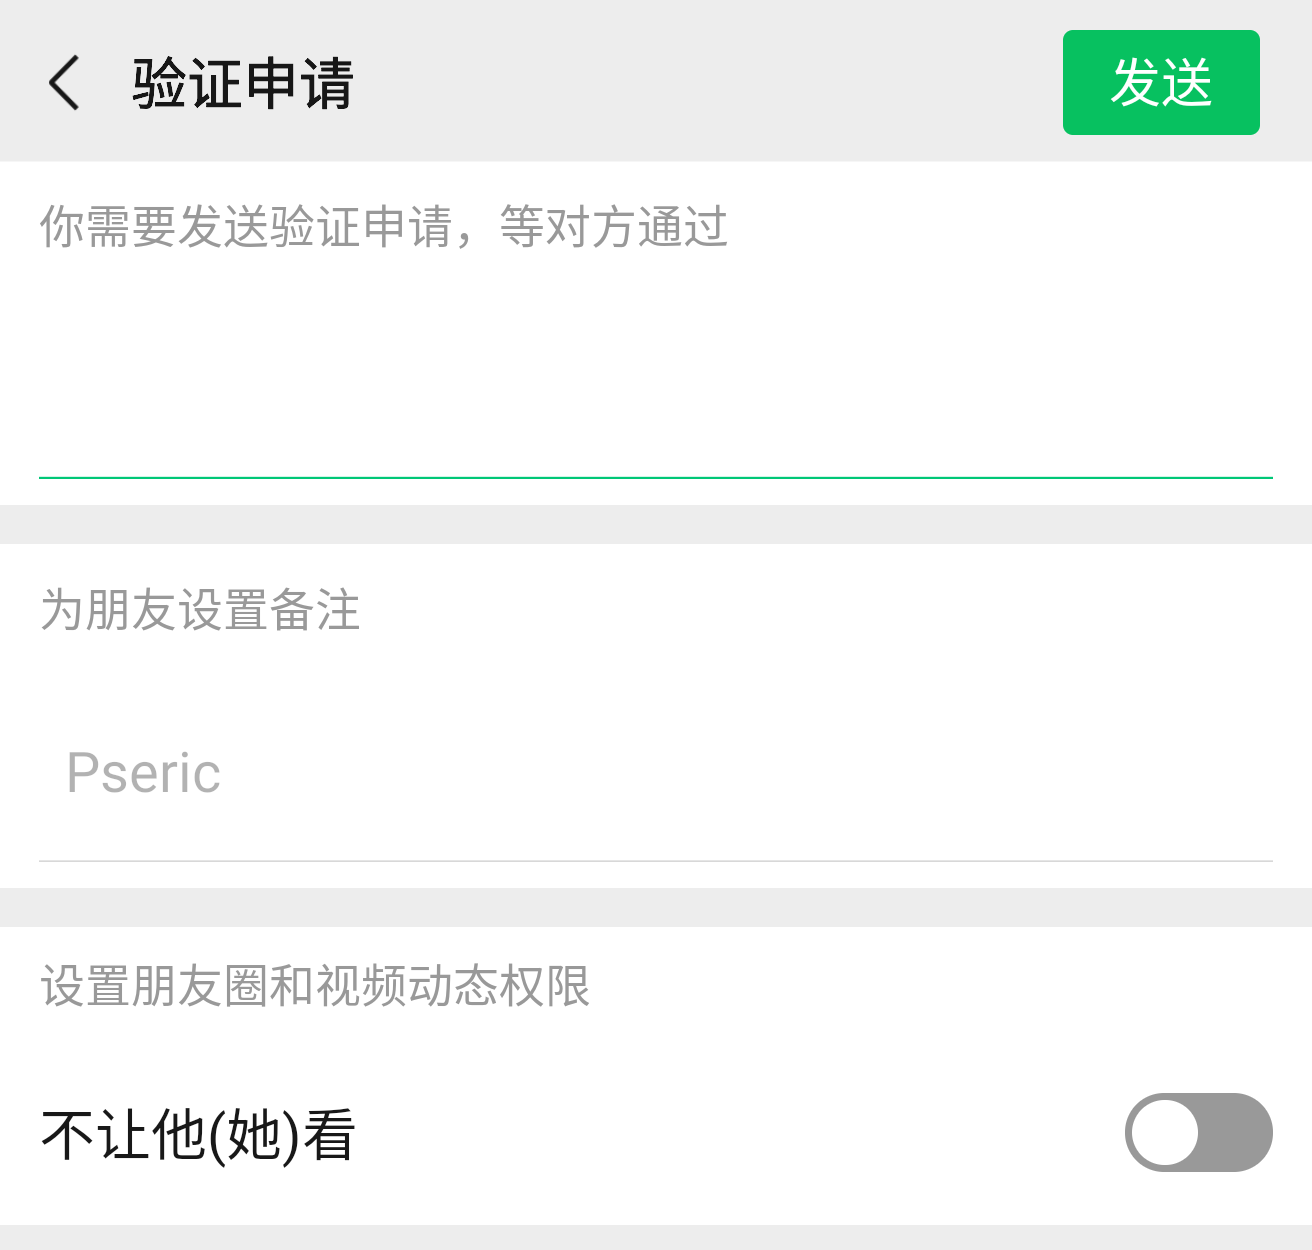 wechat-contact-request